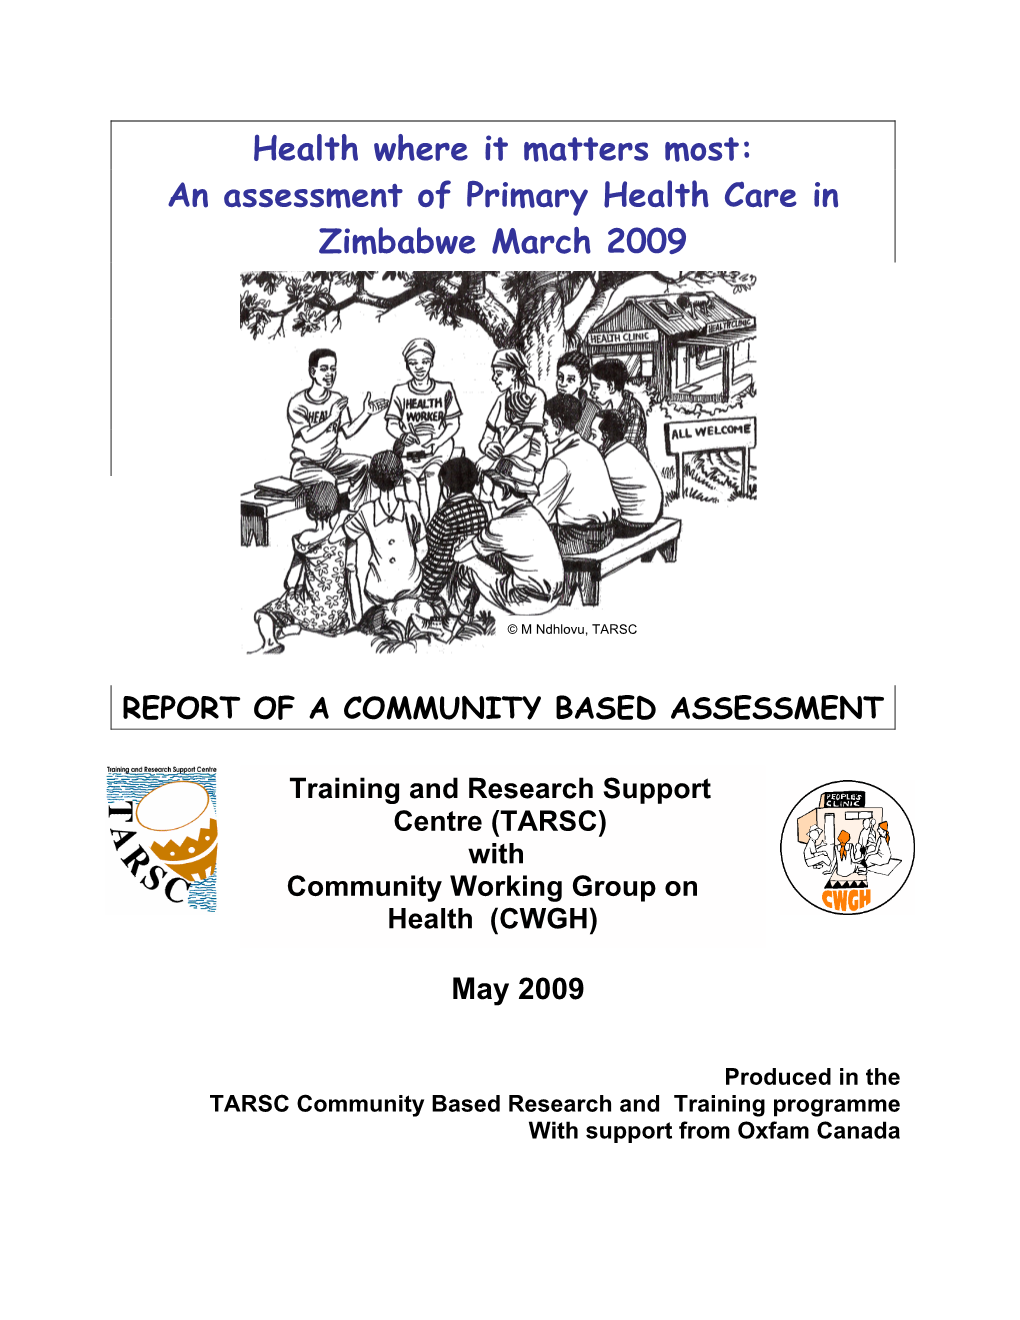 An Assessment of Primary Health Care in Zimbabwe March 2009